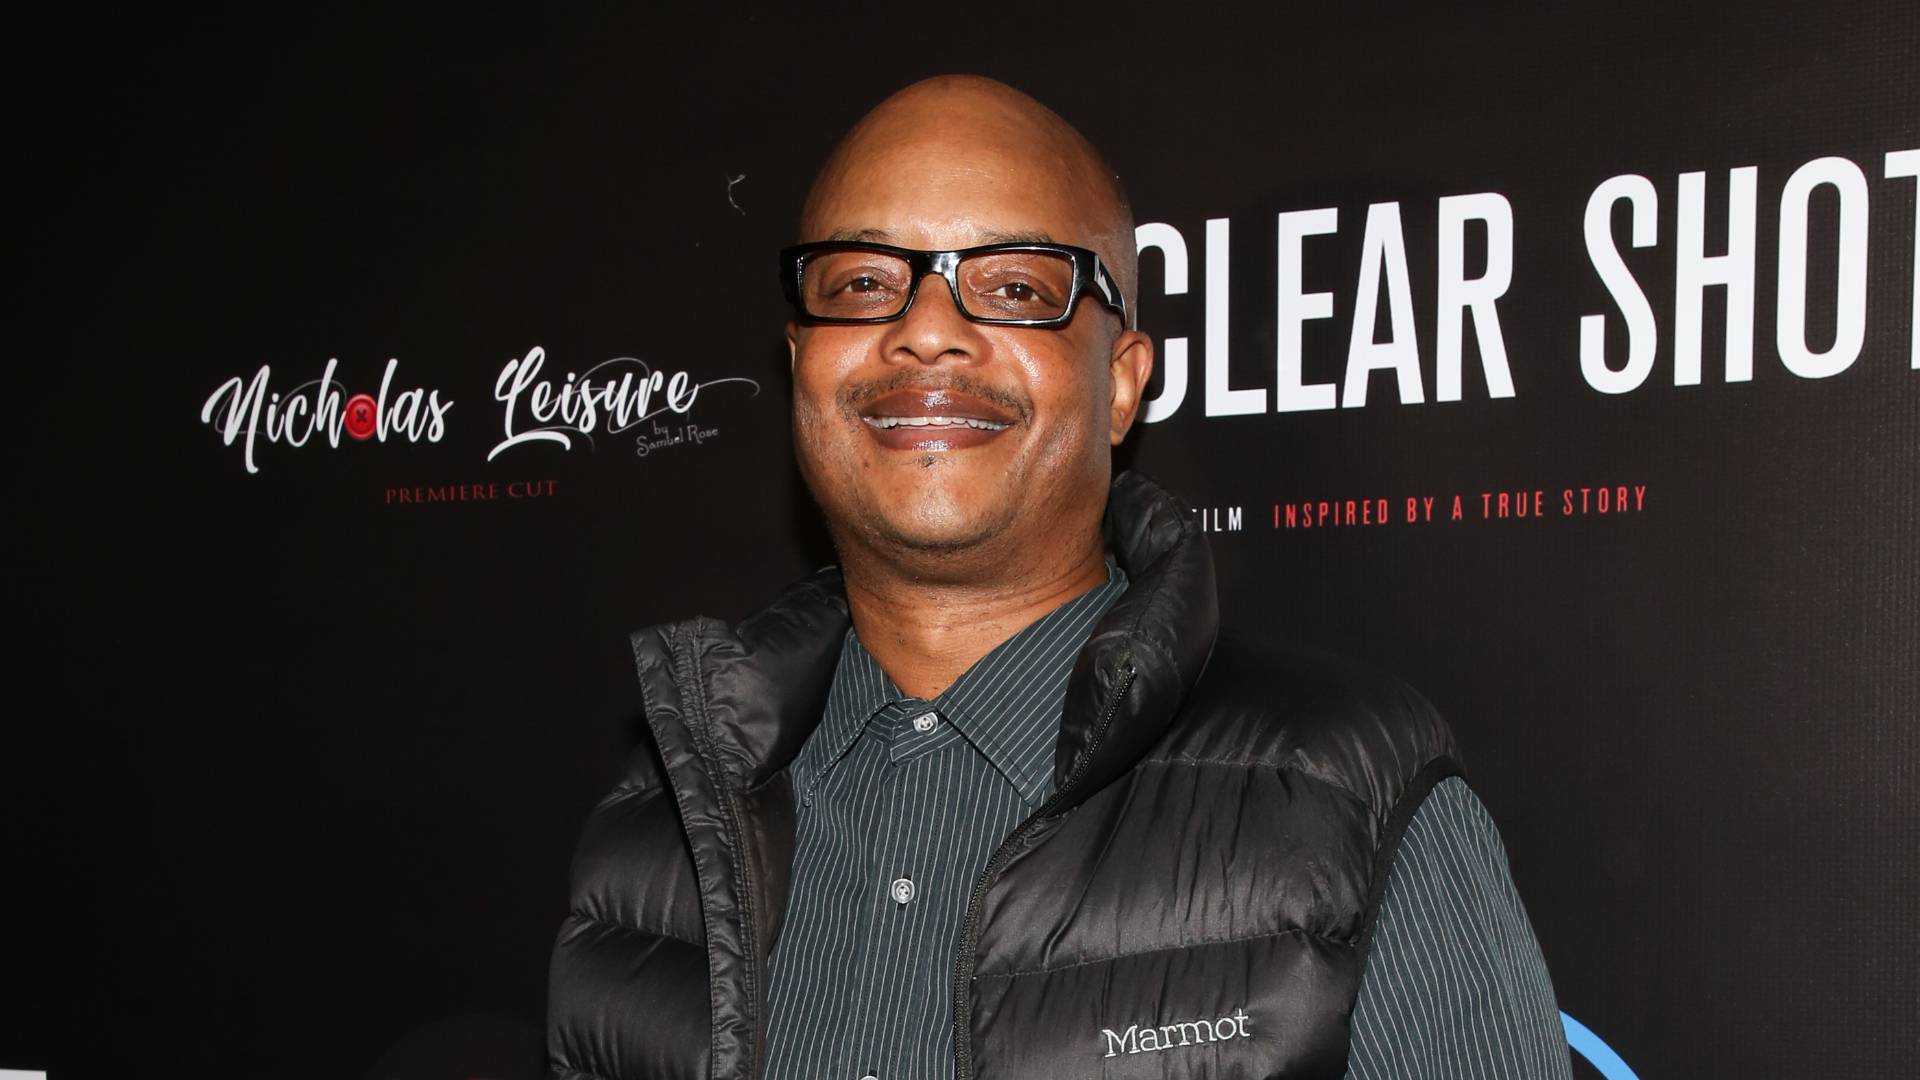 Actor Todd Bridges attends the LA premiere of "A Clear Shot" at TCL Chinese Theatre on October 05, 2019 in Hollywood, California. 